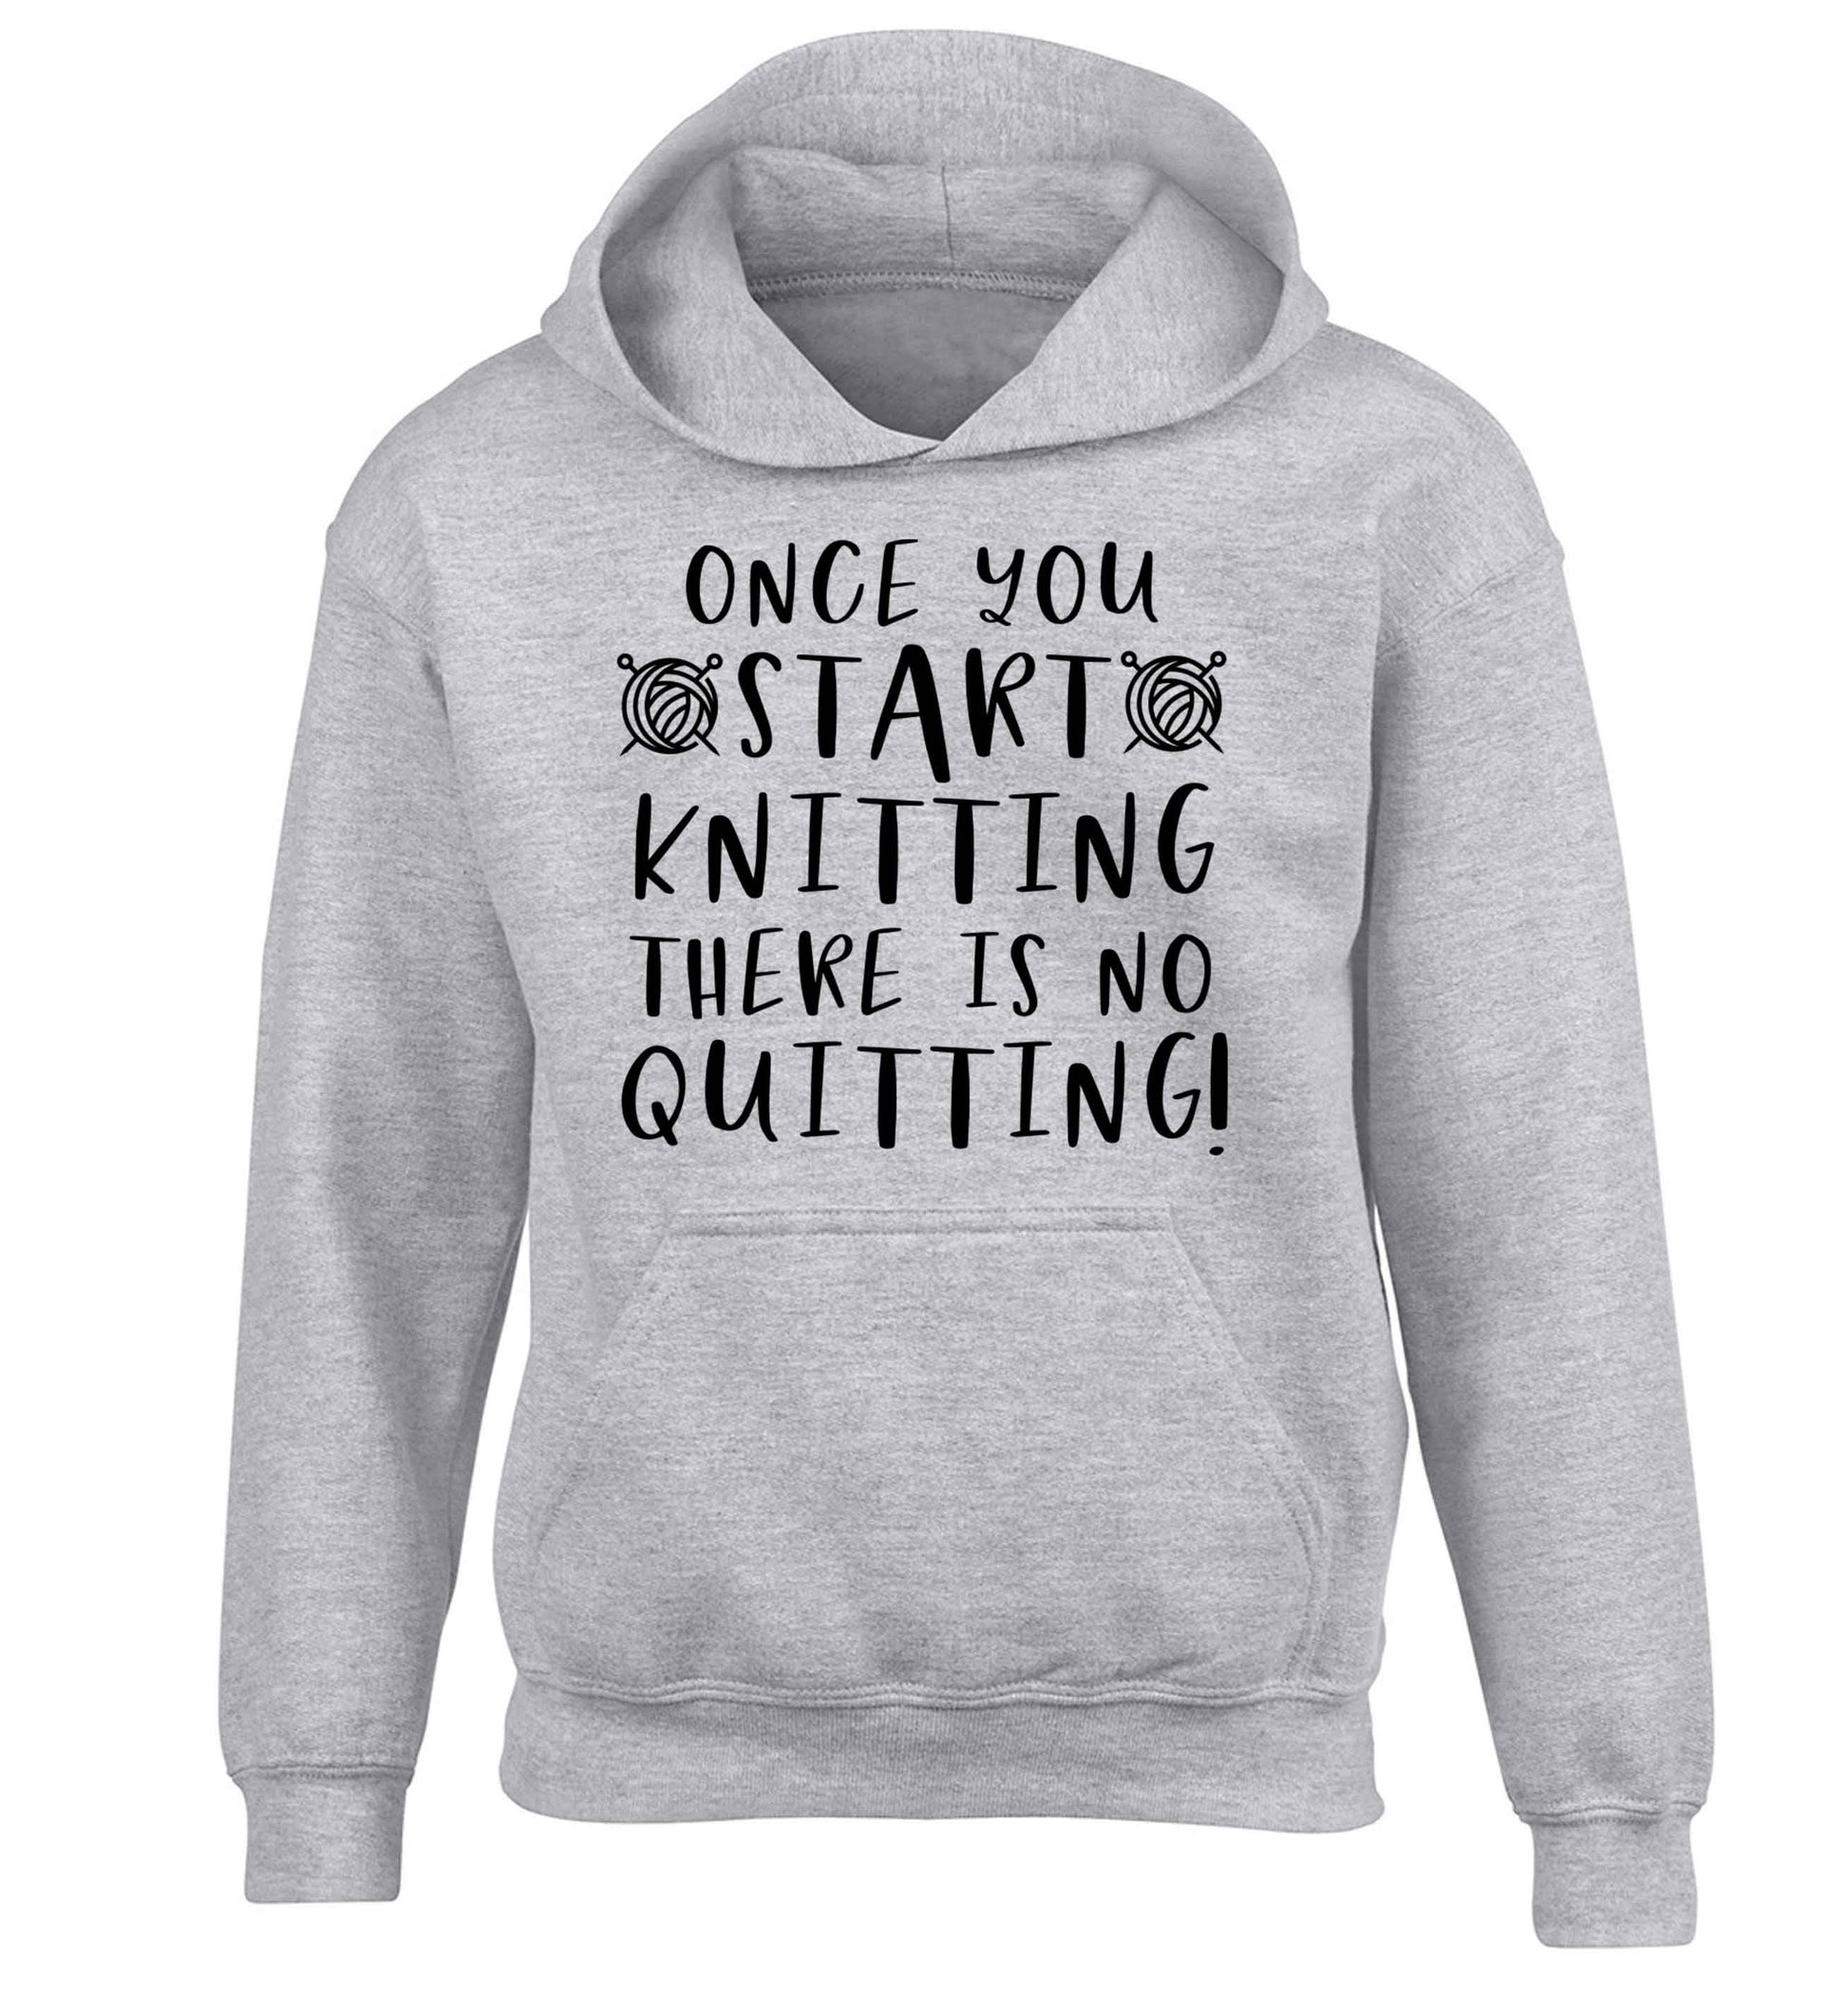 Once you start knitting there is no quitting! children's grey hoodie 12-13 Years